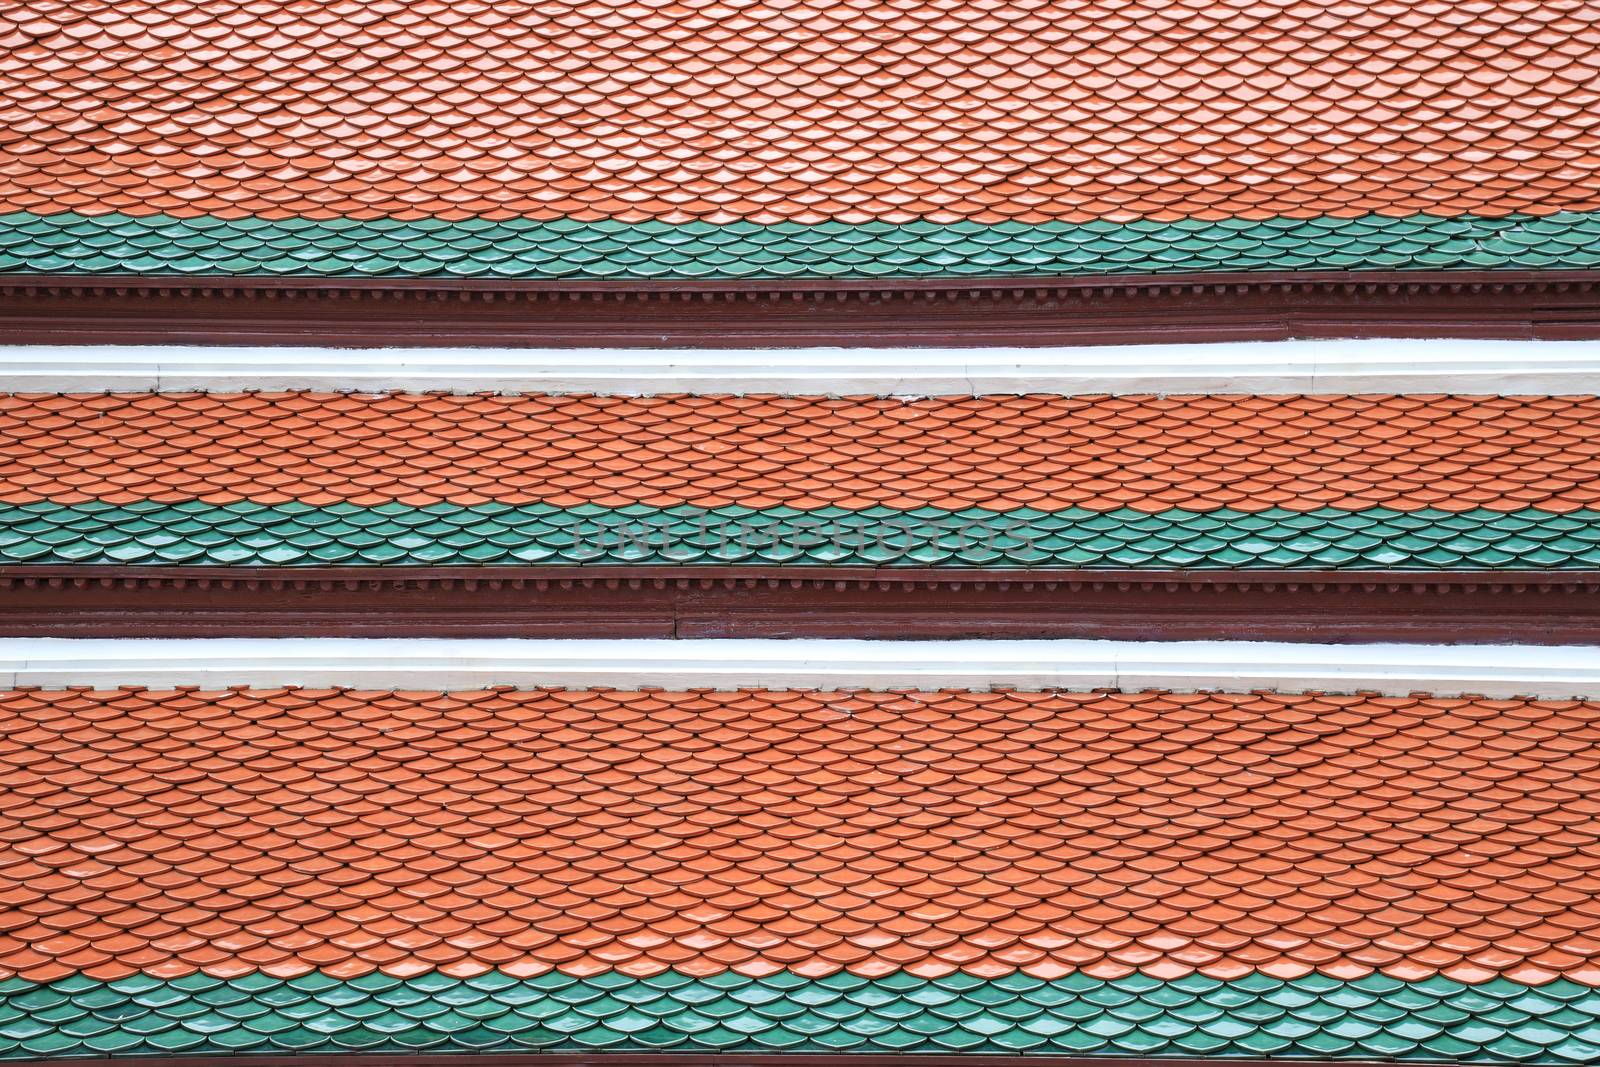 Pattern of Thai temple roof tiles on a sunny day.